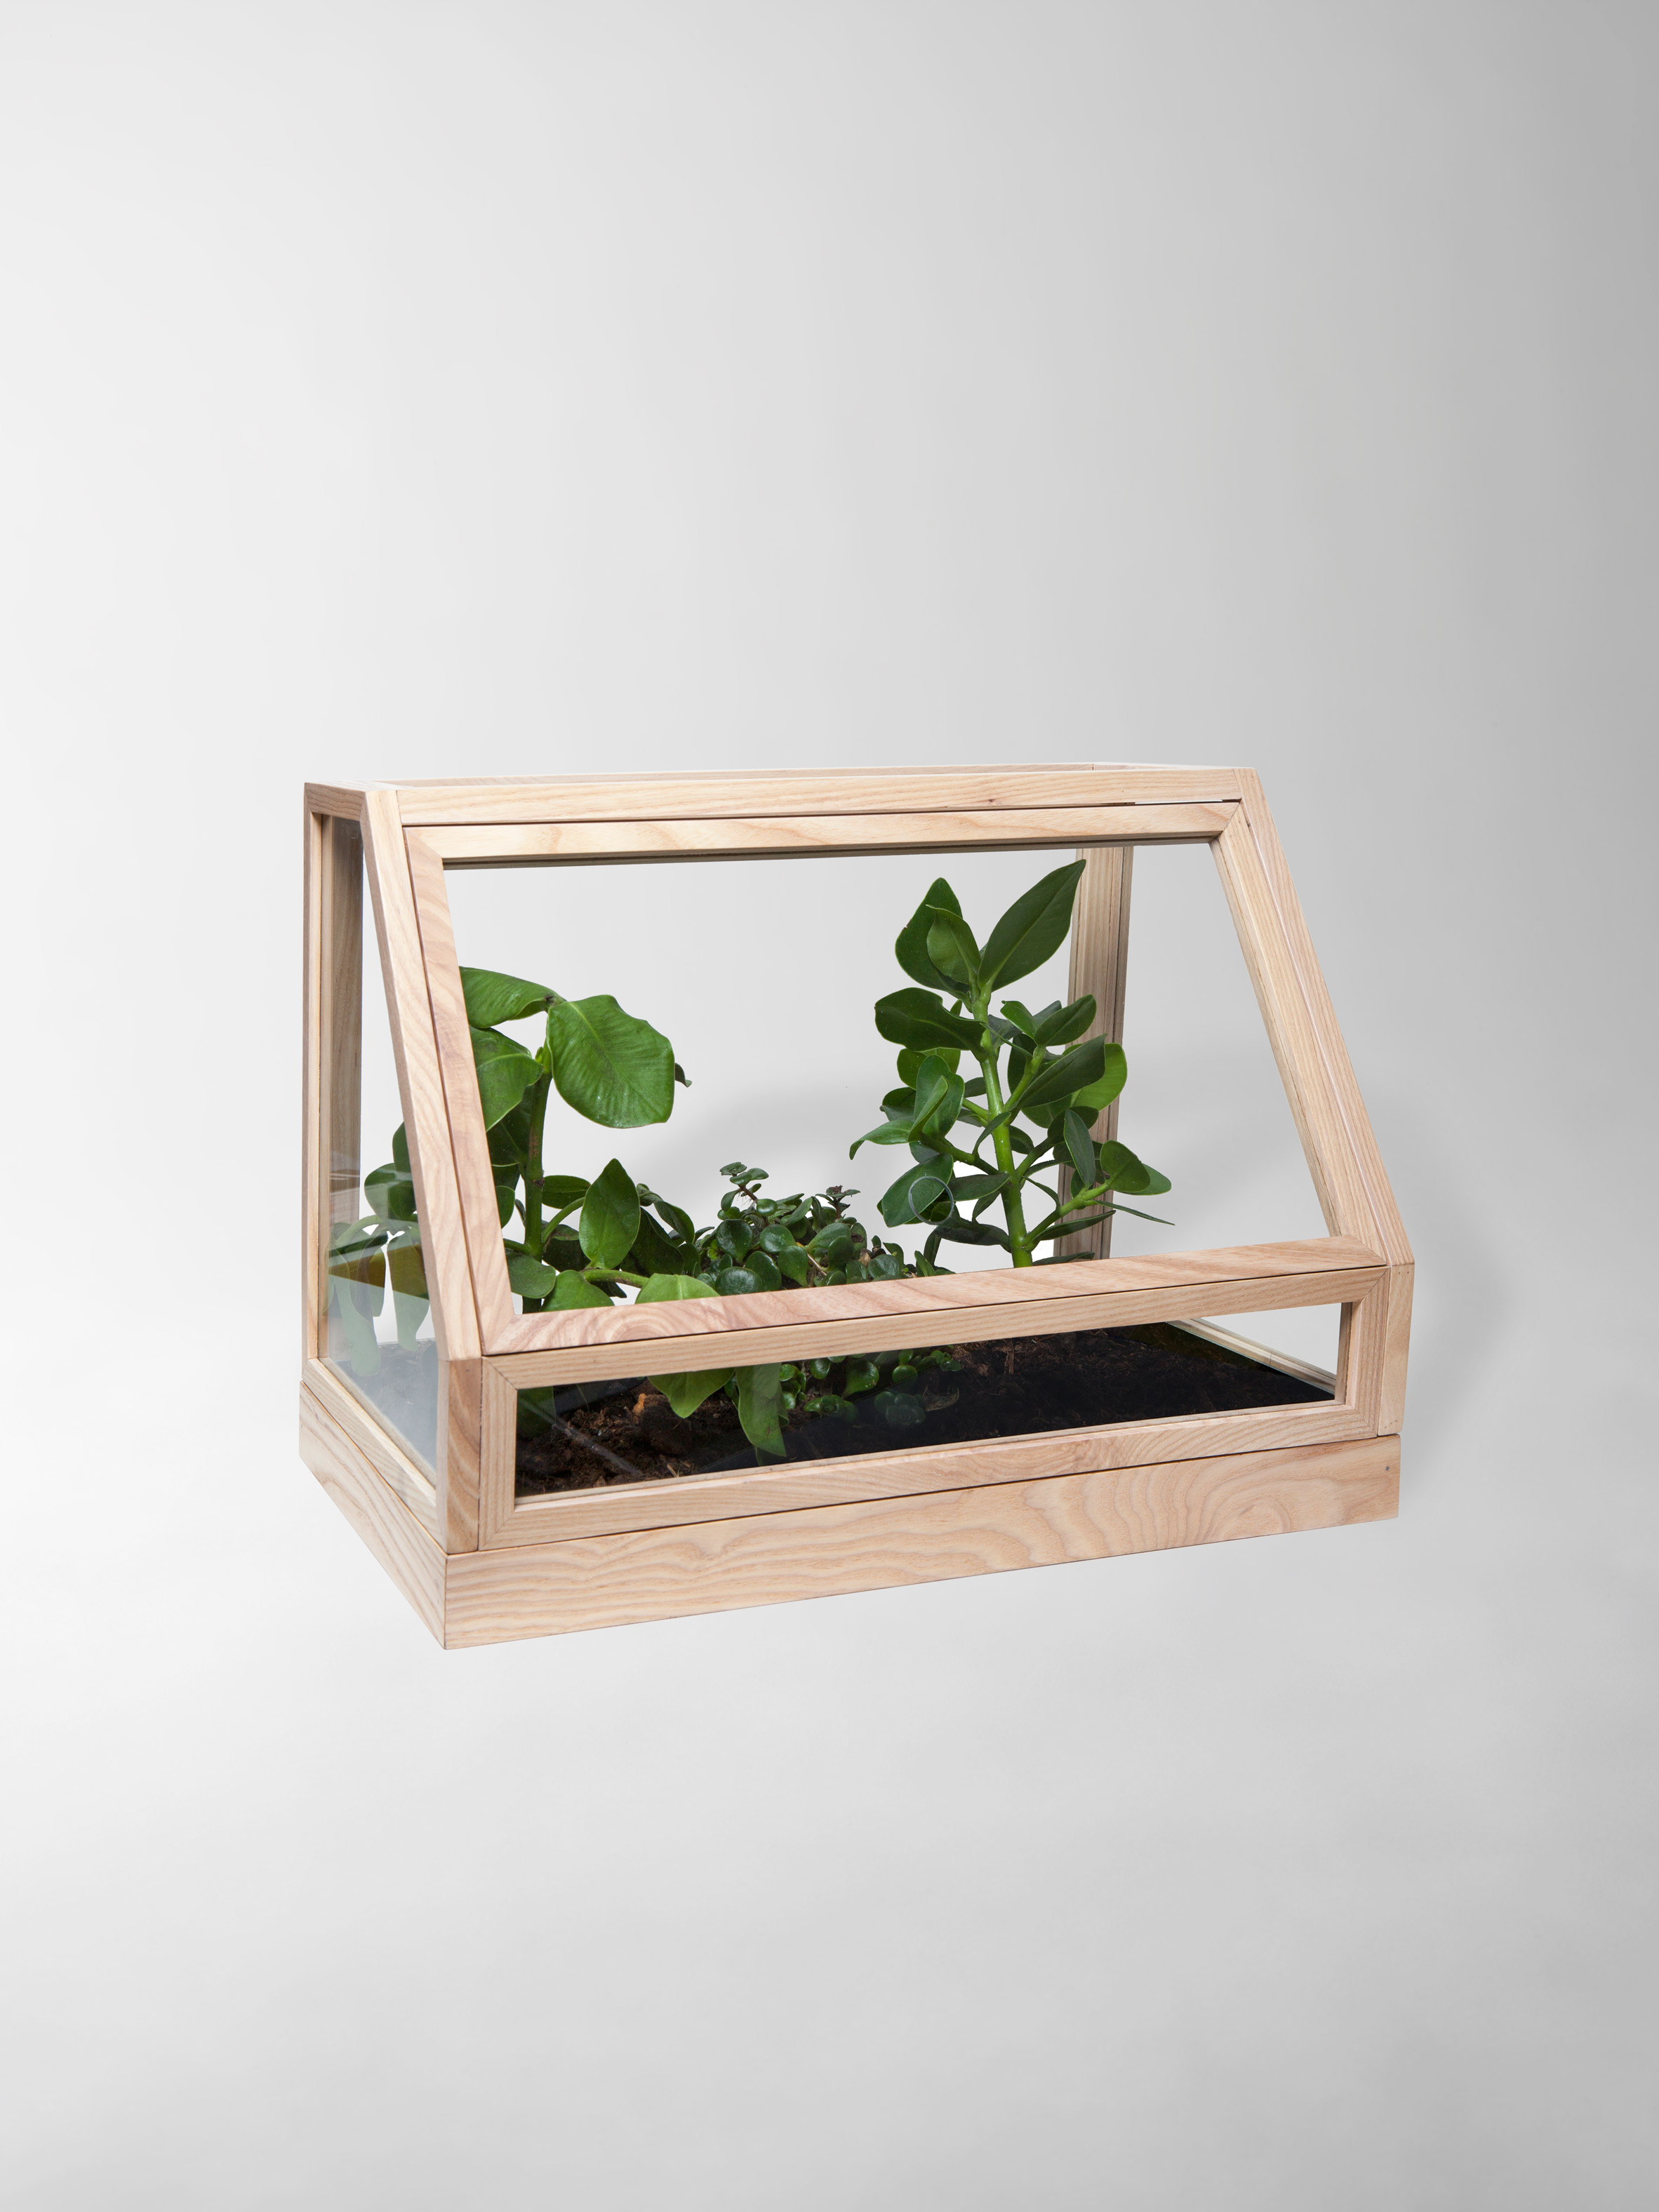 Greenhouse Mini by Atelier 2+ for Design House Stockholm